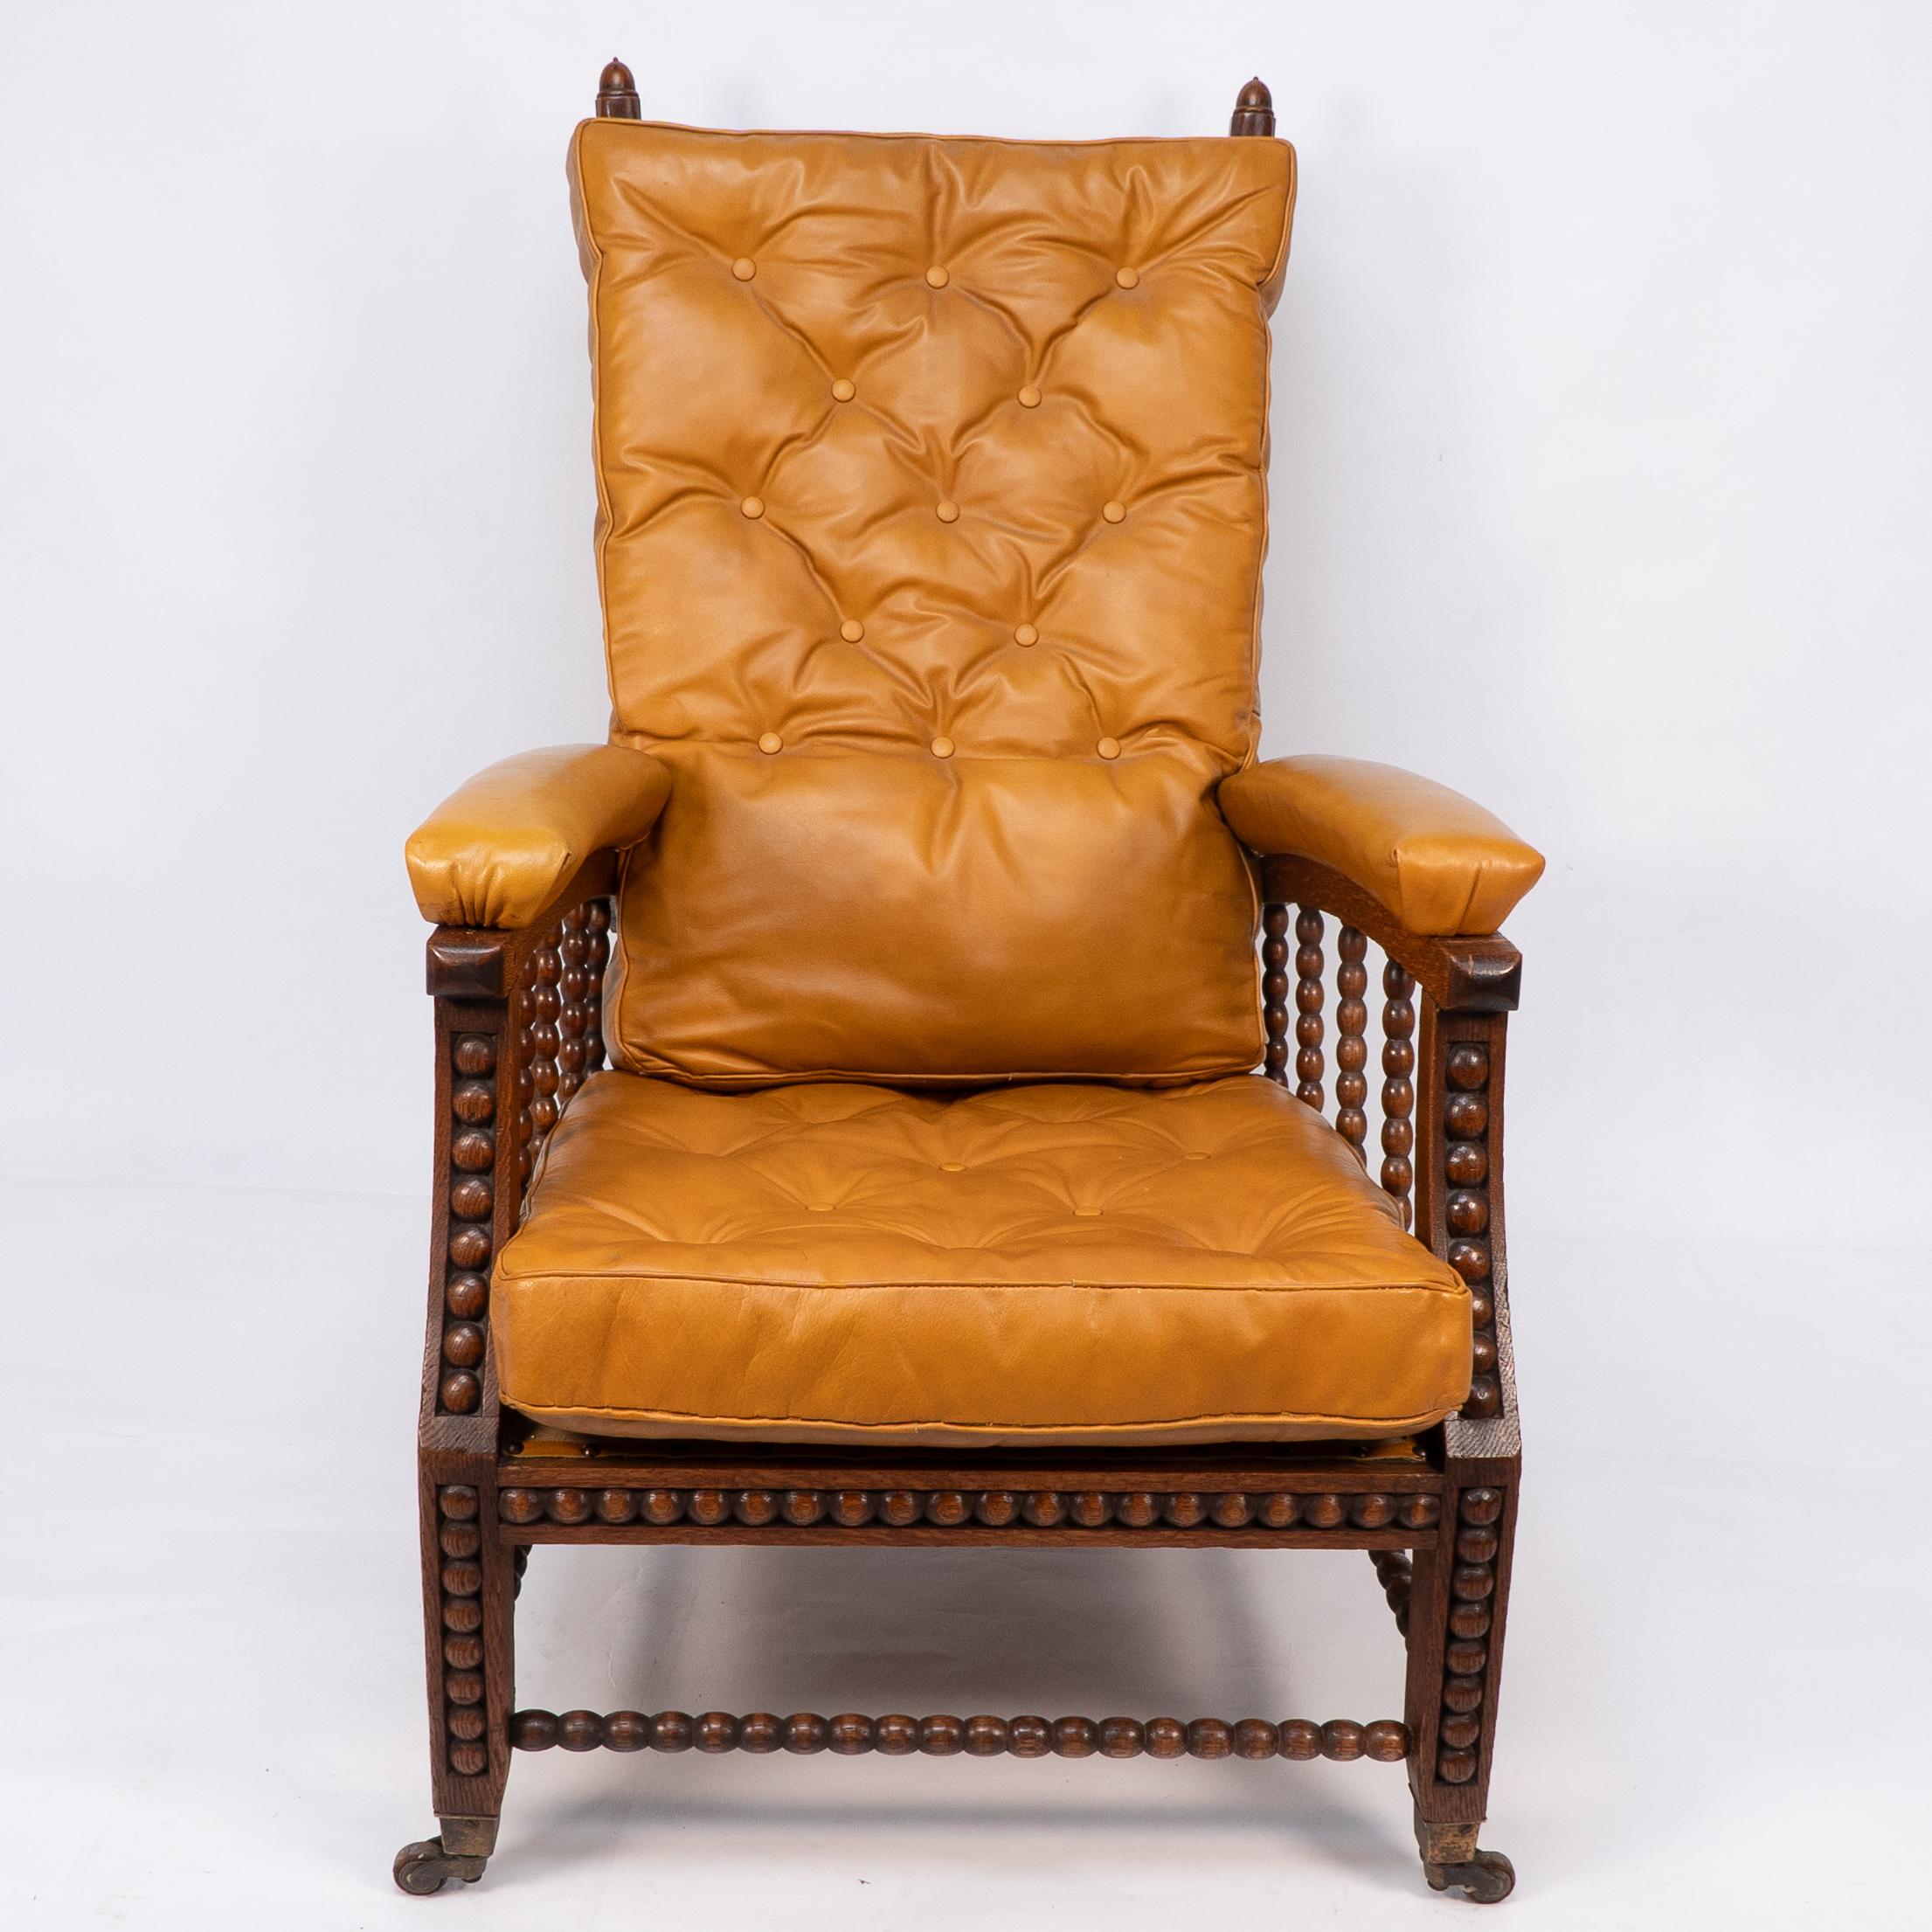 Phillip Webb for Morris and Co. Designed in C1866.
A rare Aesthetic movement oak adjustable reclining armchair with good quality tan leather button back upholstery. The arched arms with leather armrests united to the arched legs by bobbin turned